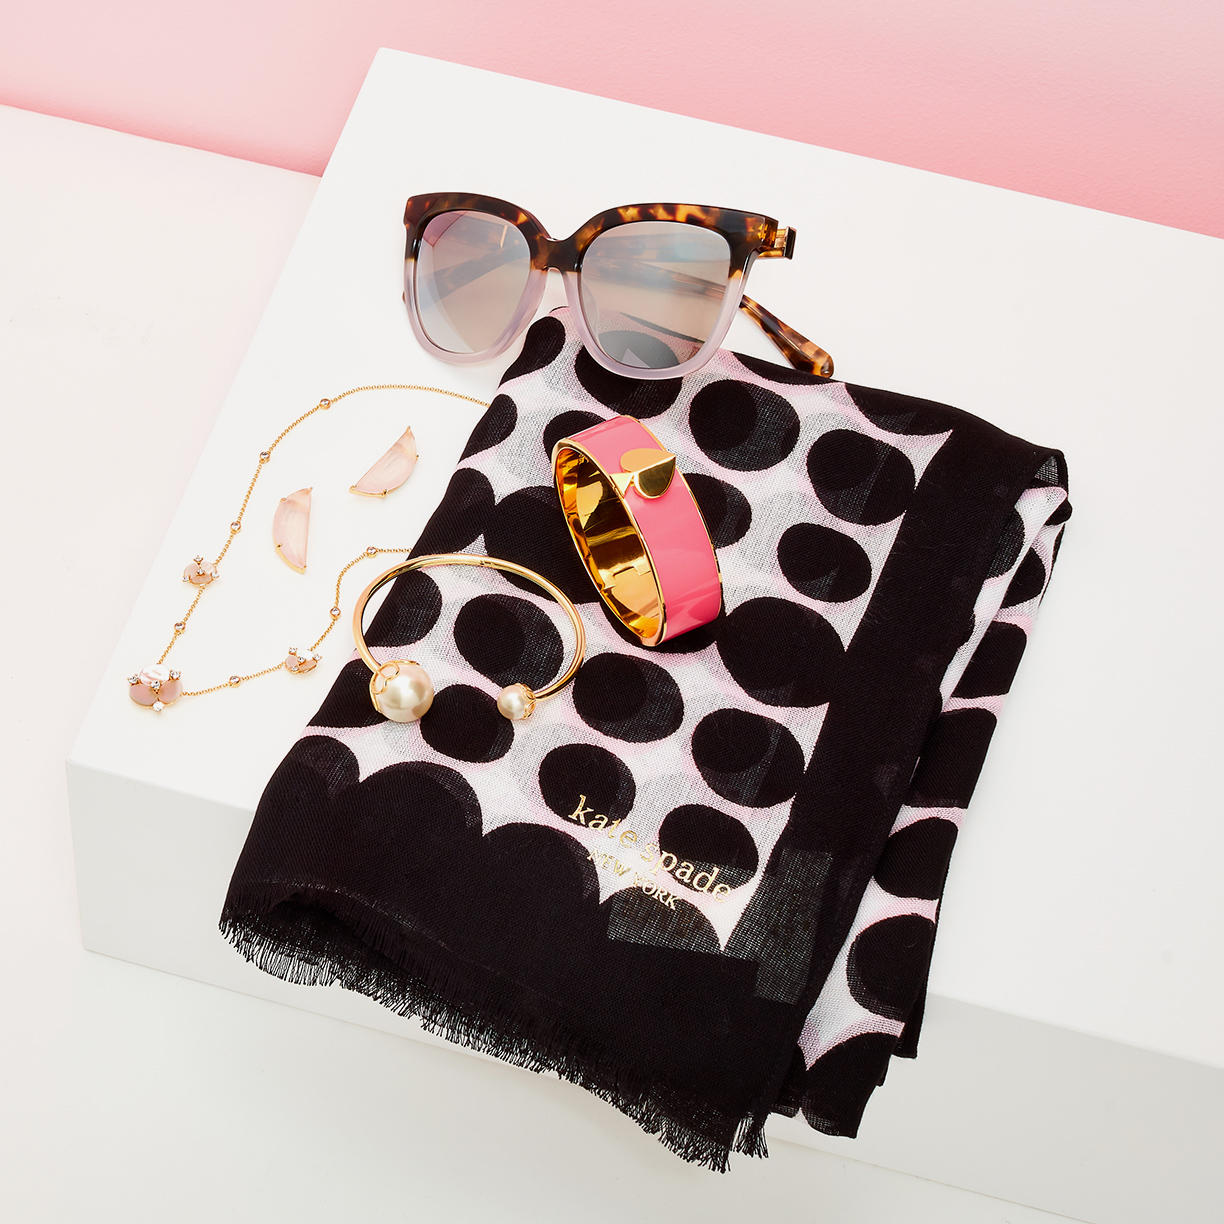 Kate Spade New York Accessories & More